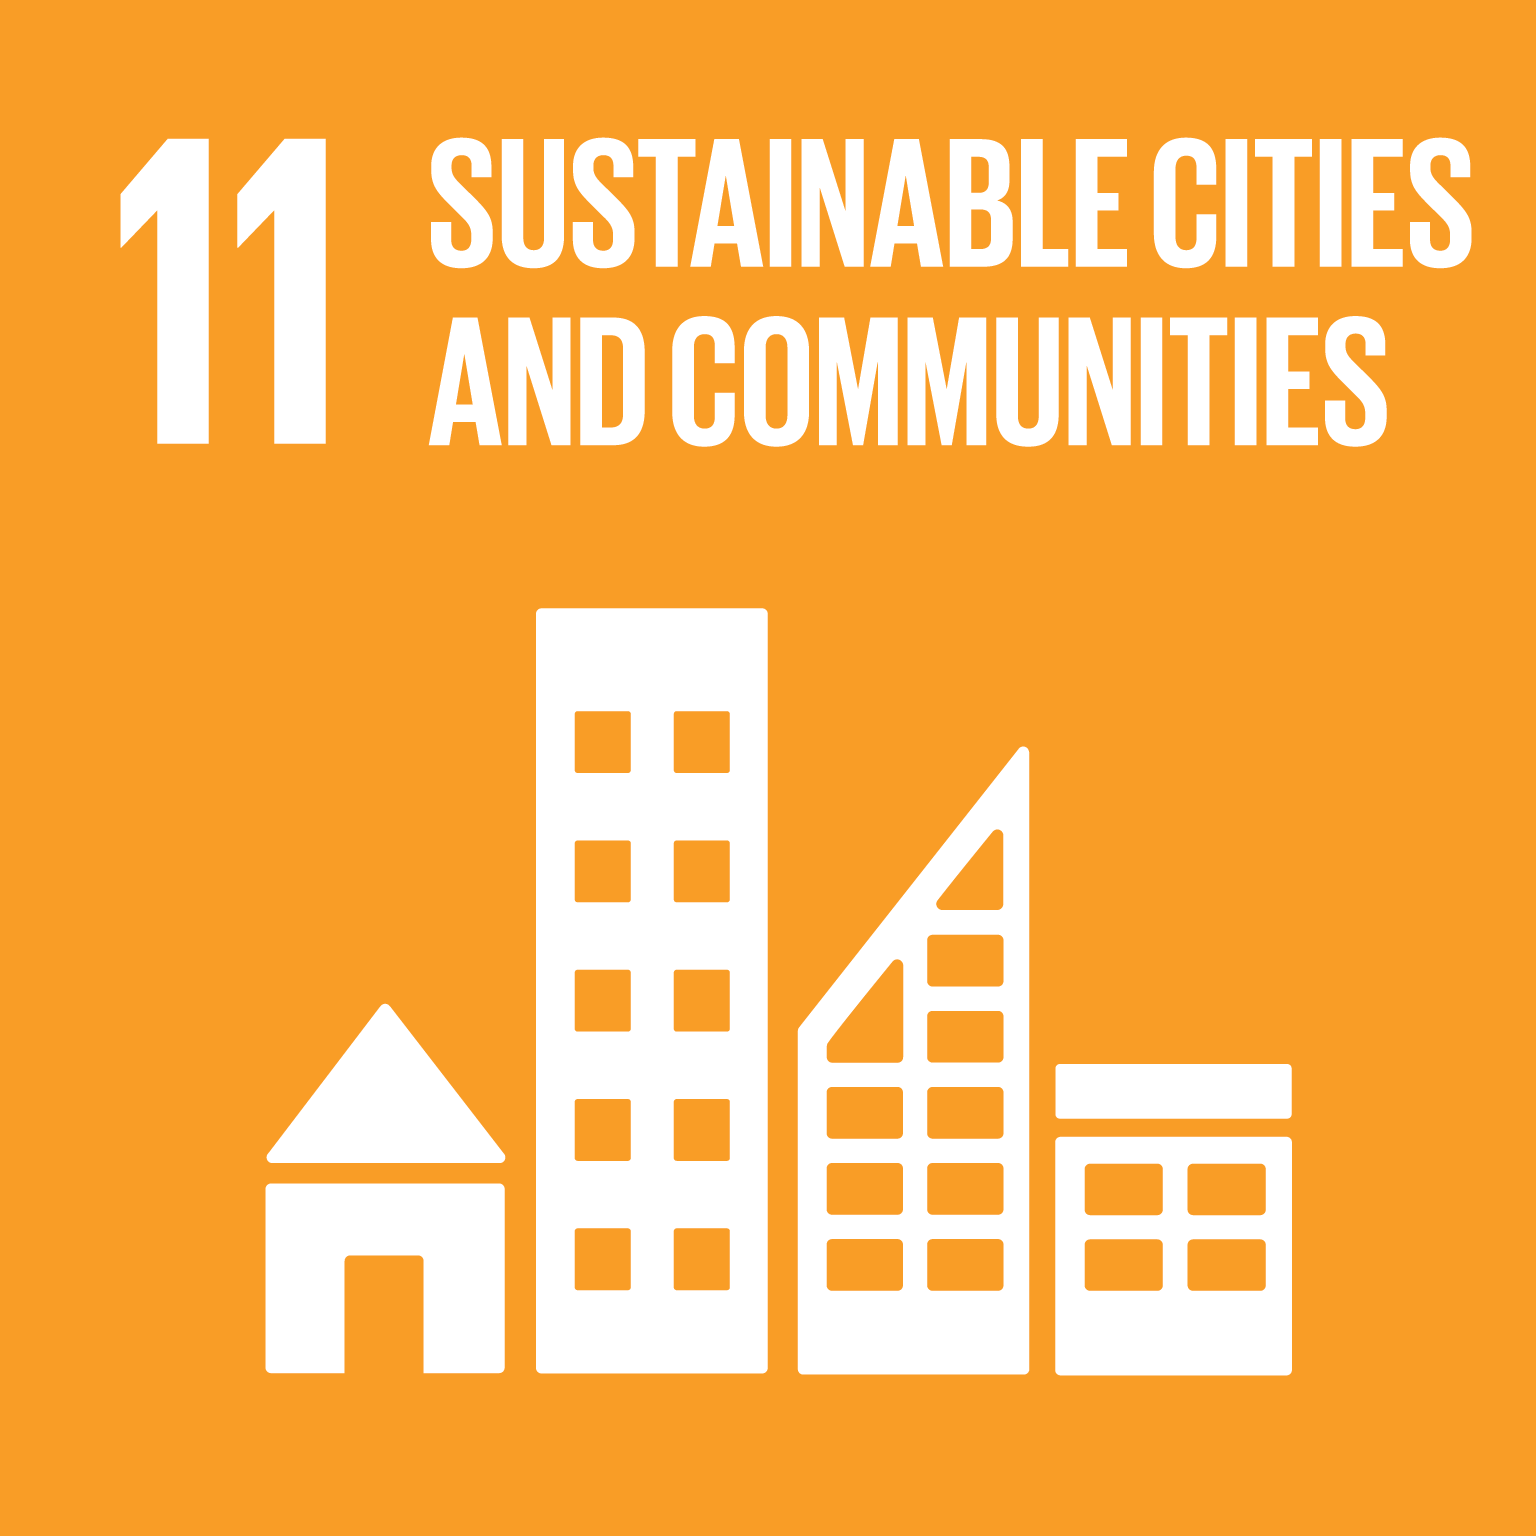 Goal 11 - sustainable cities and communities